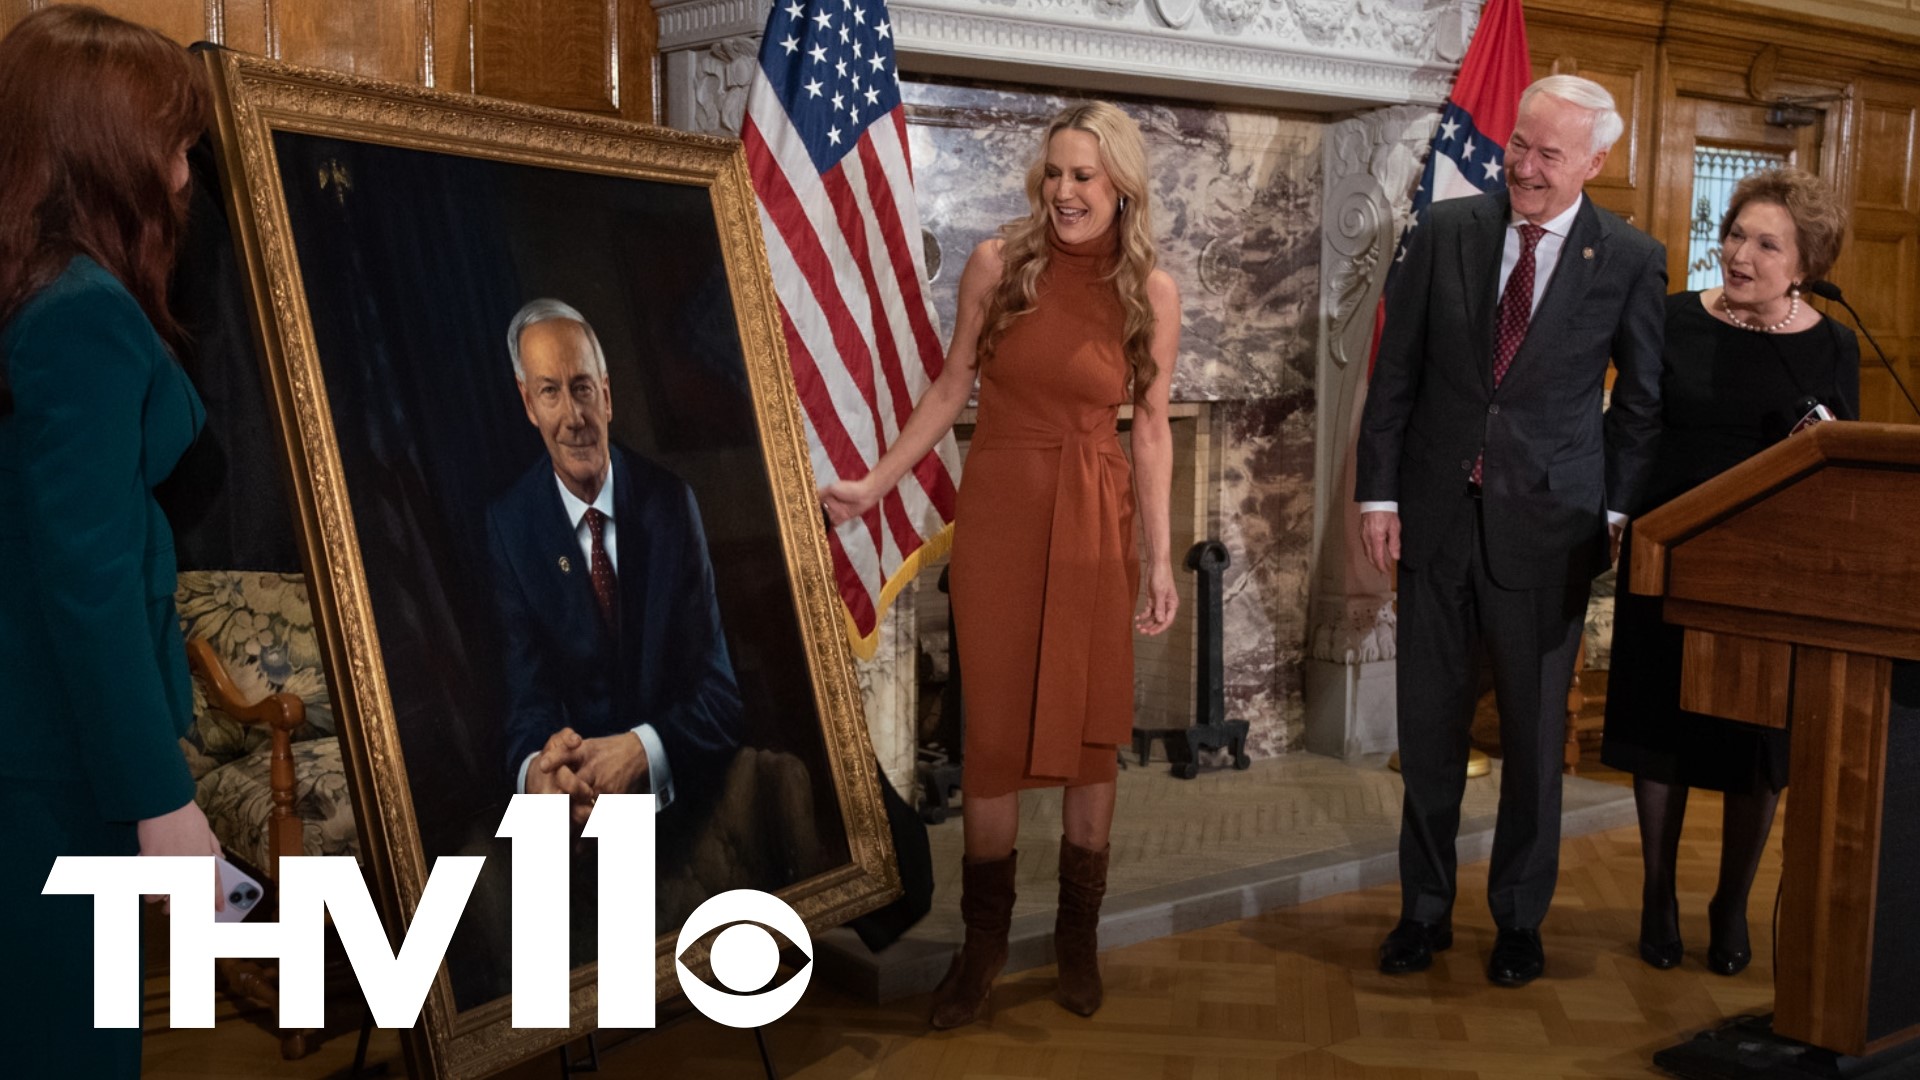 As Gov. Hutchinson prepares to leave office in about a week, his official portrait was unveiled at the state Capitol on Tuesday.